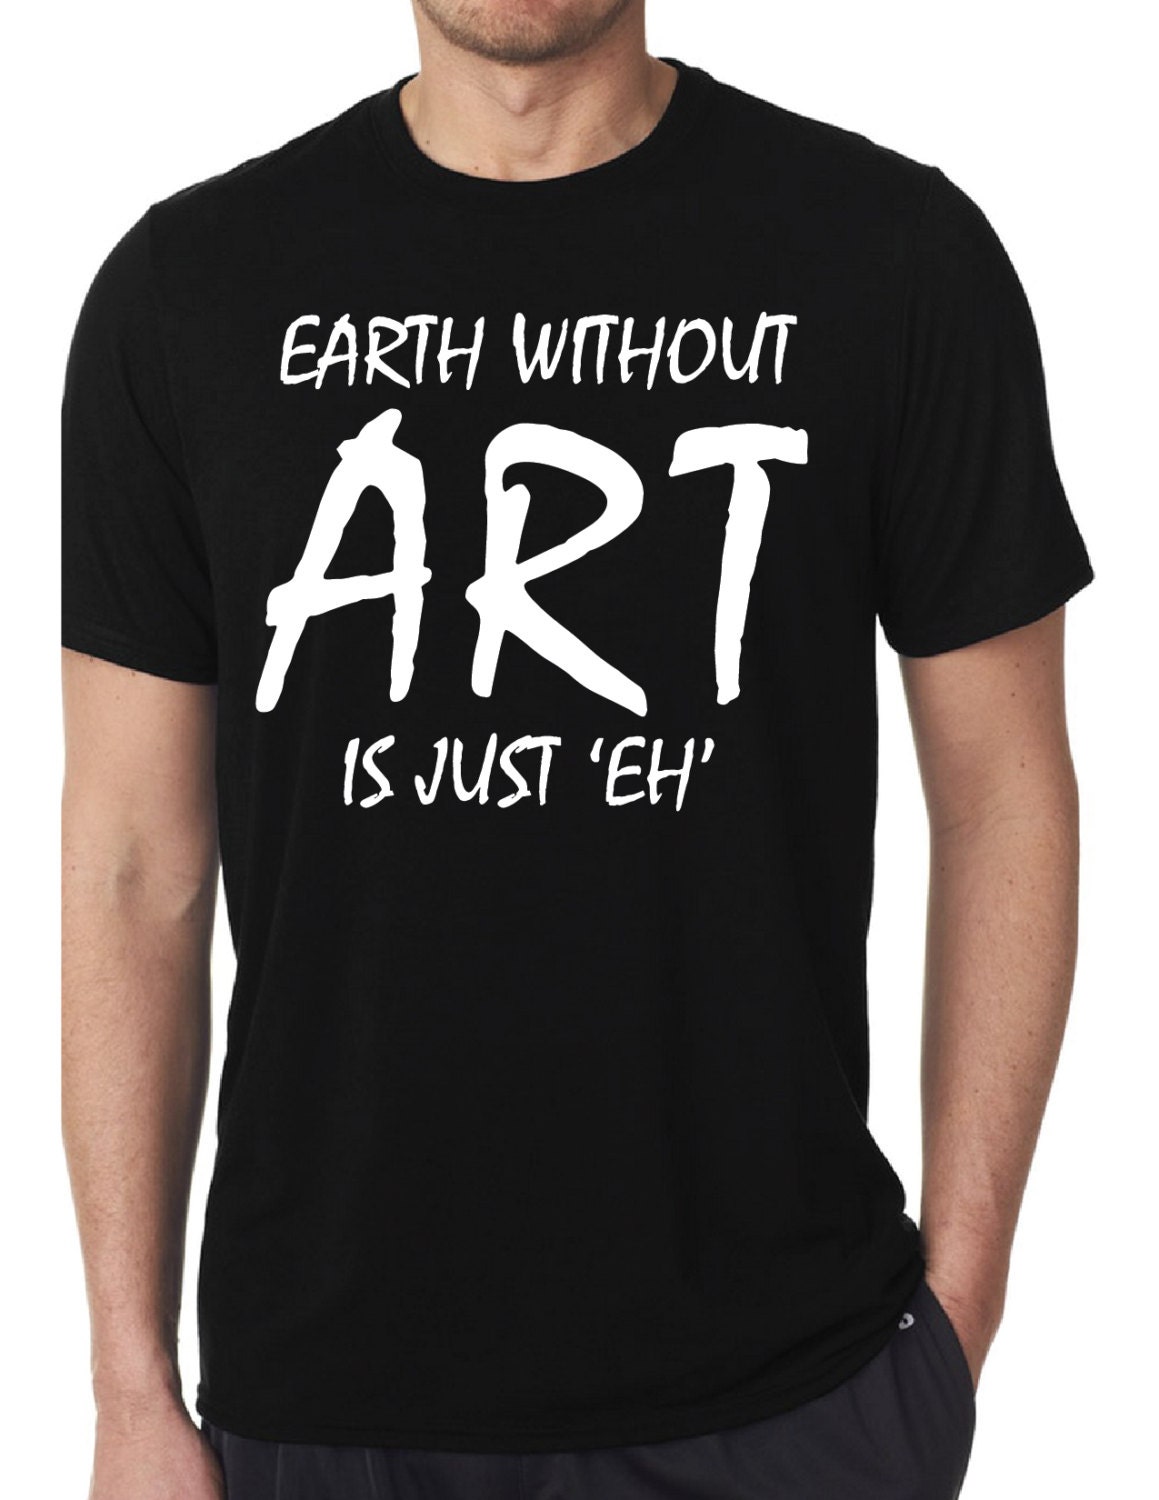 Earth Without Art Is Just EH Men's Black Tee Shirt by OverUrHead